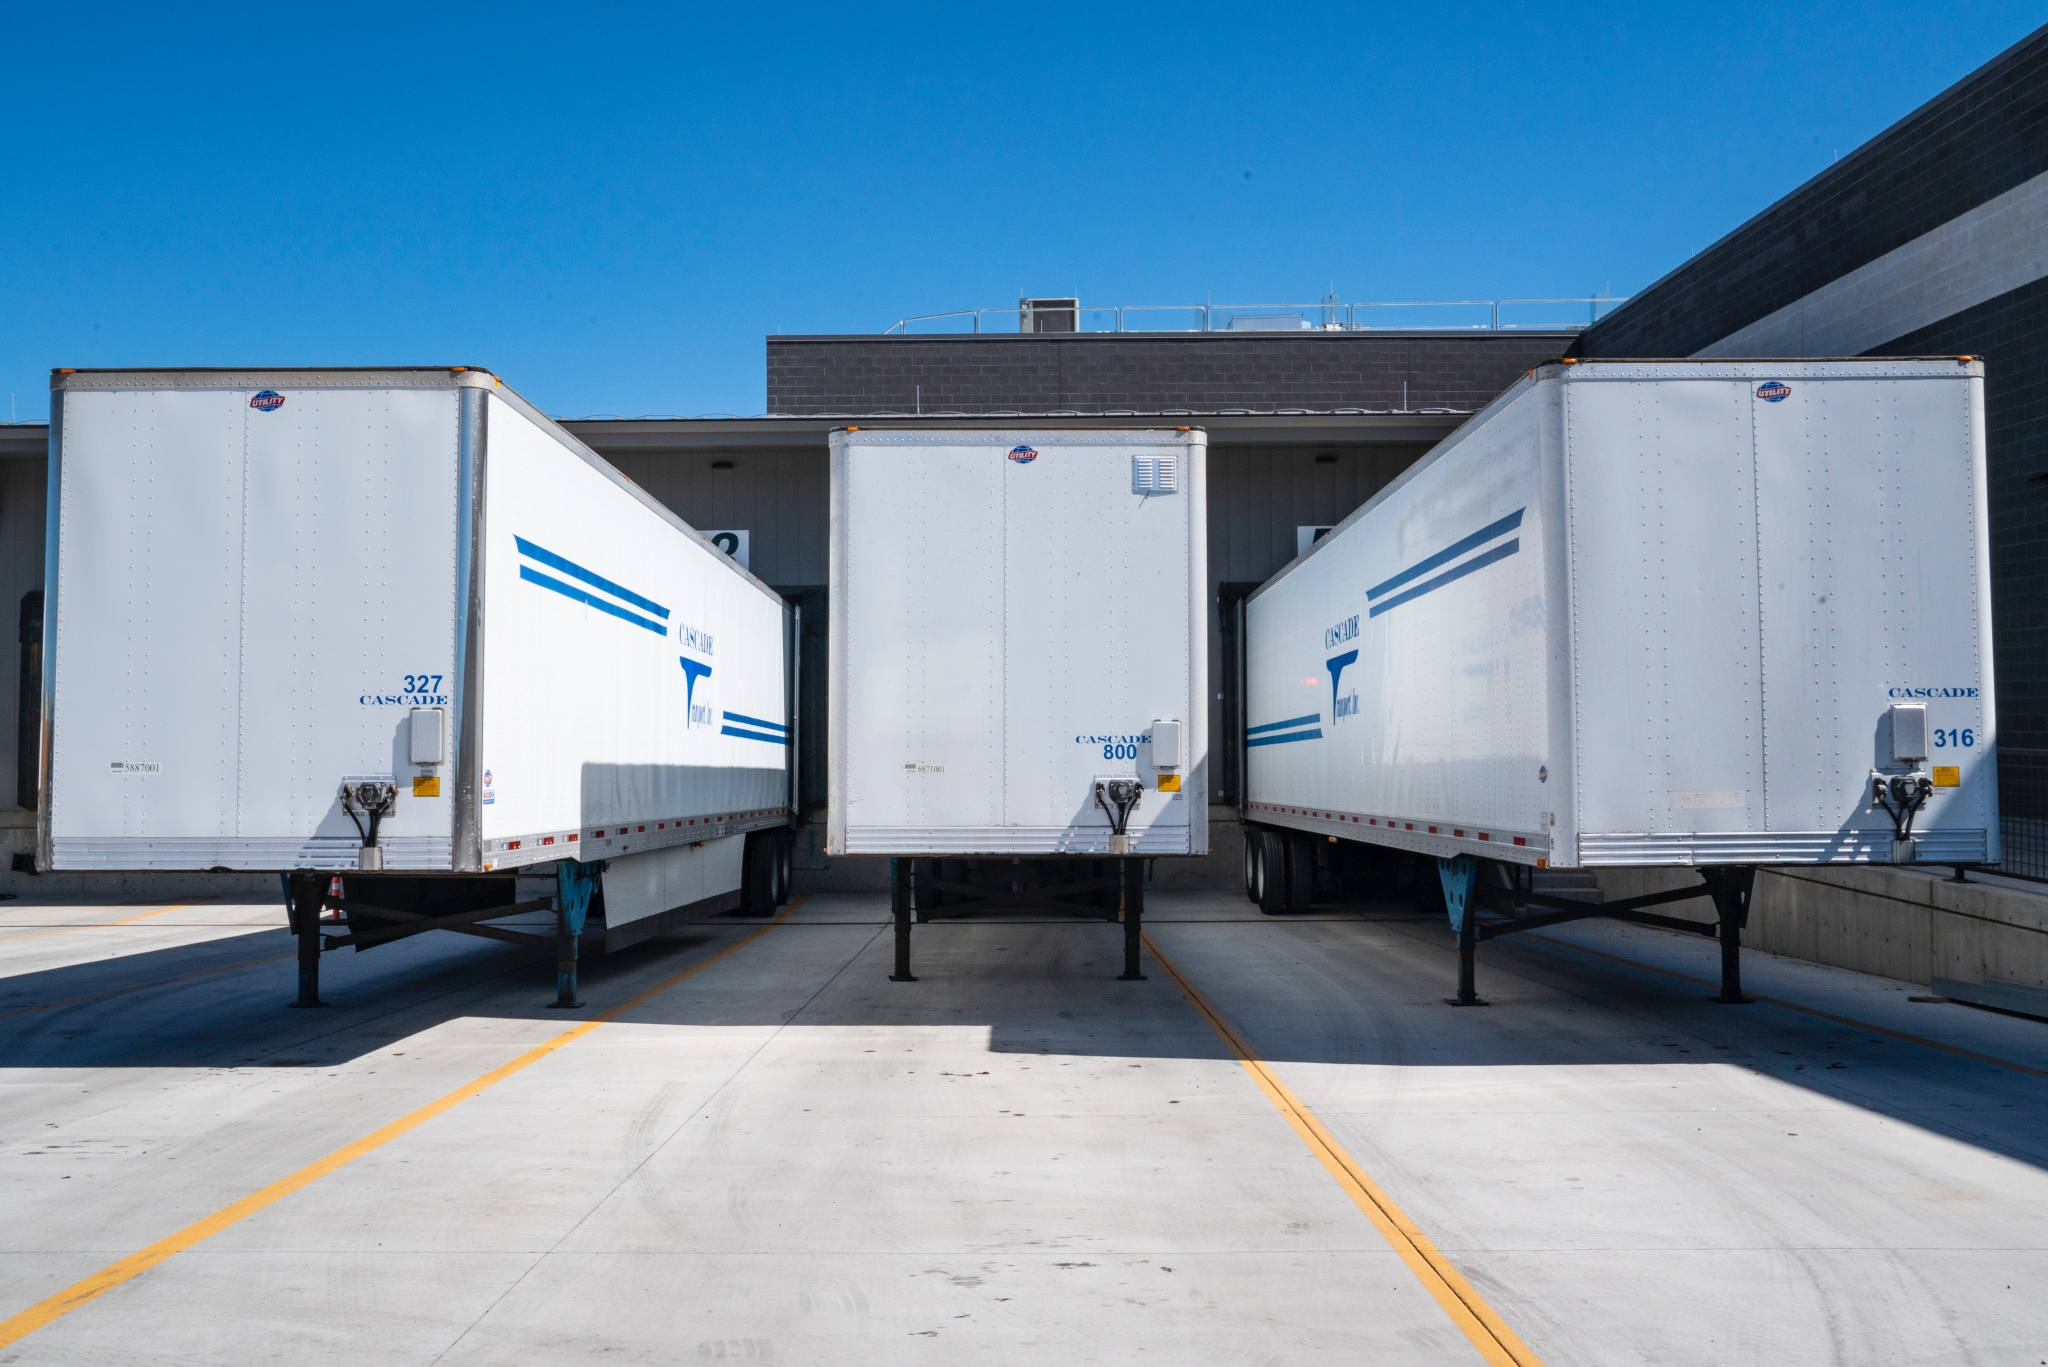 Massive drop in trailer production projected in 2020